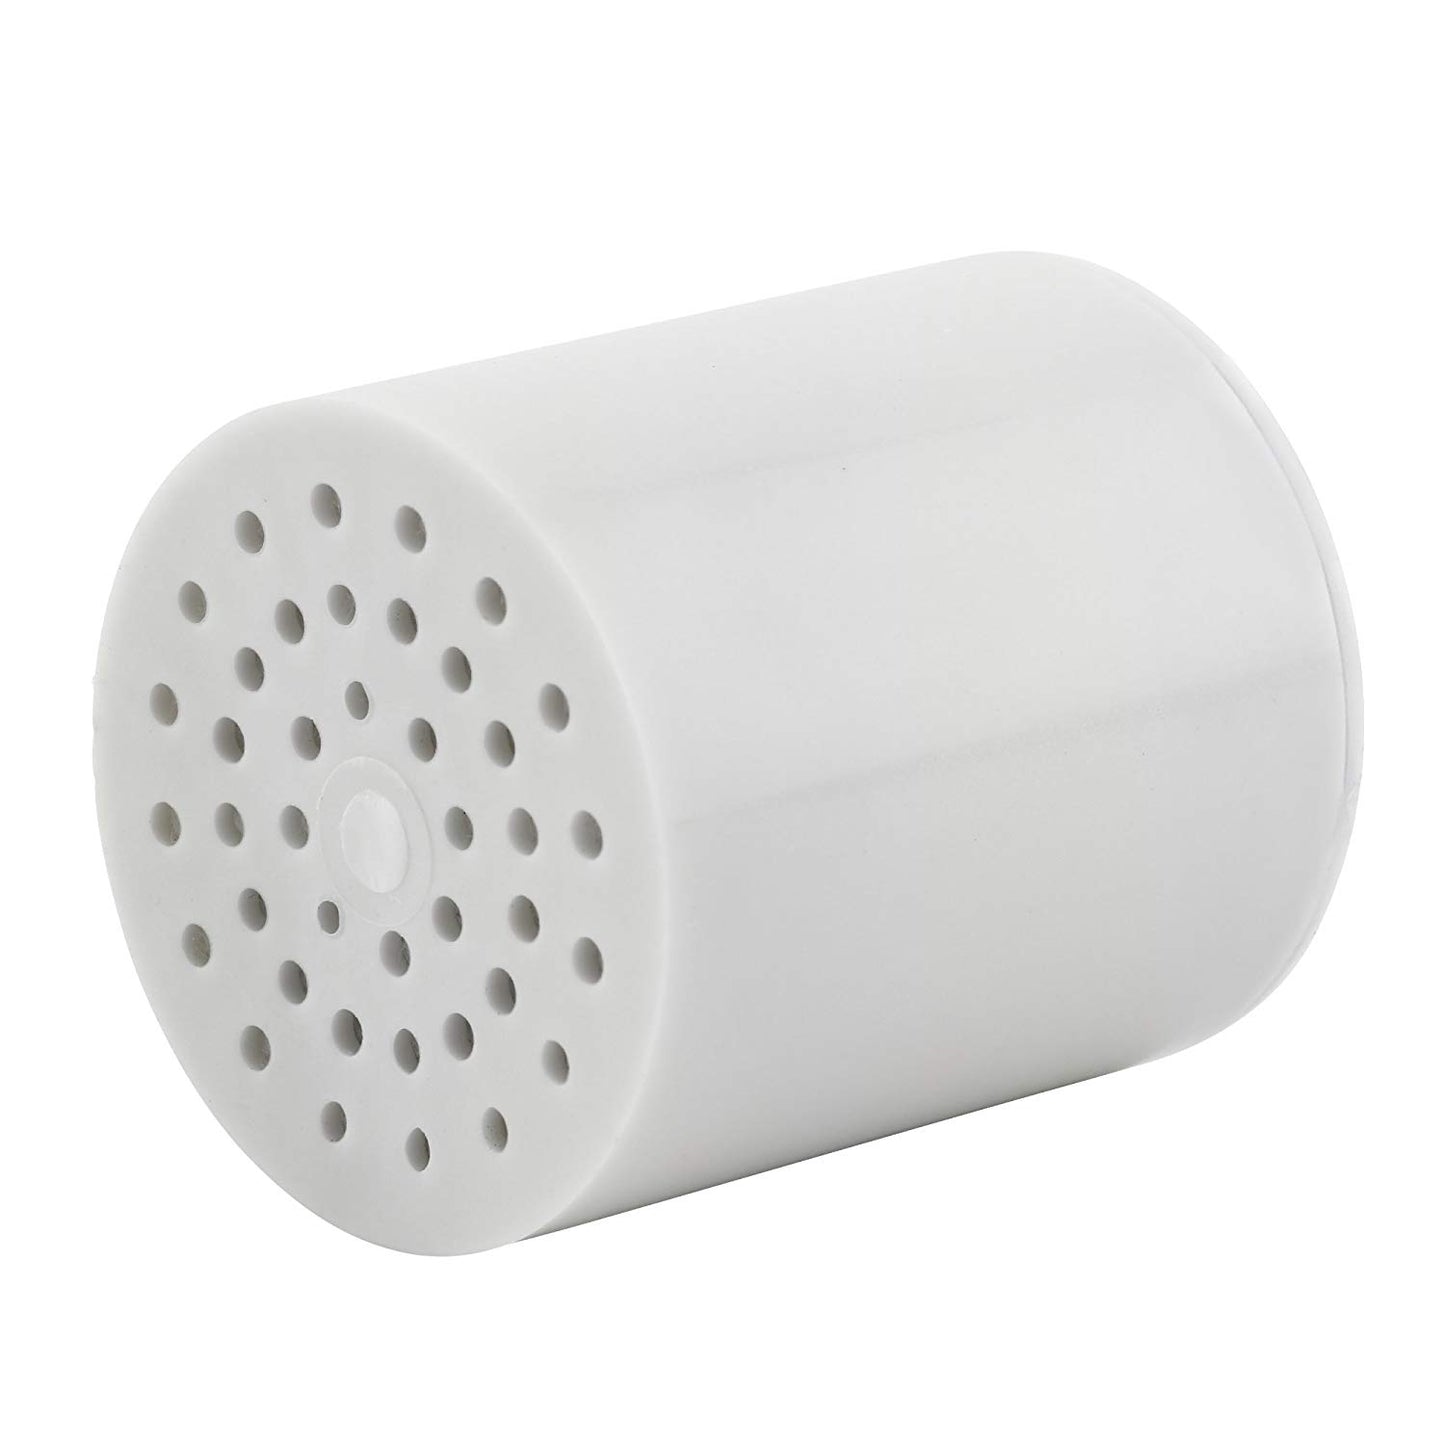 8-Stage Shower Filter Replacement Cartridges